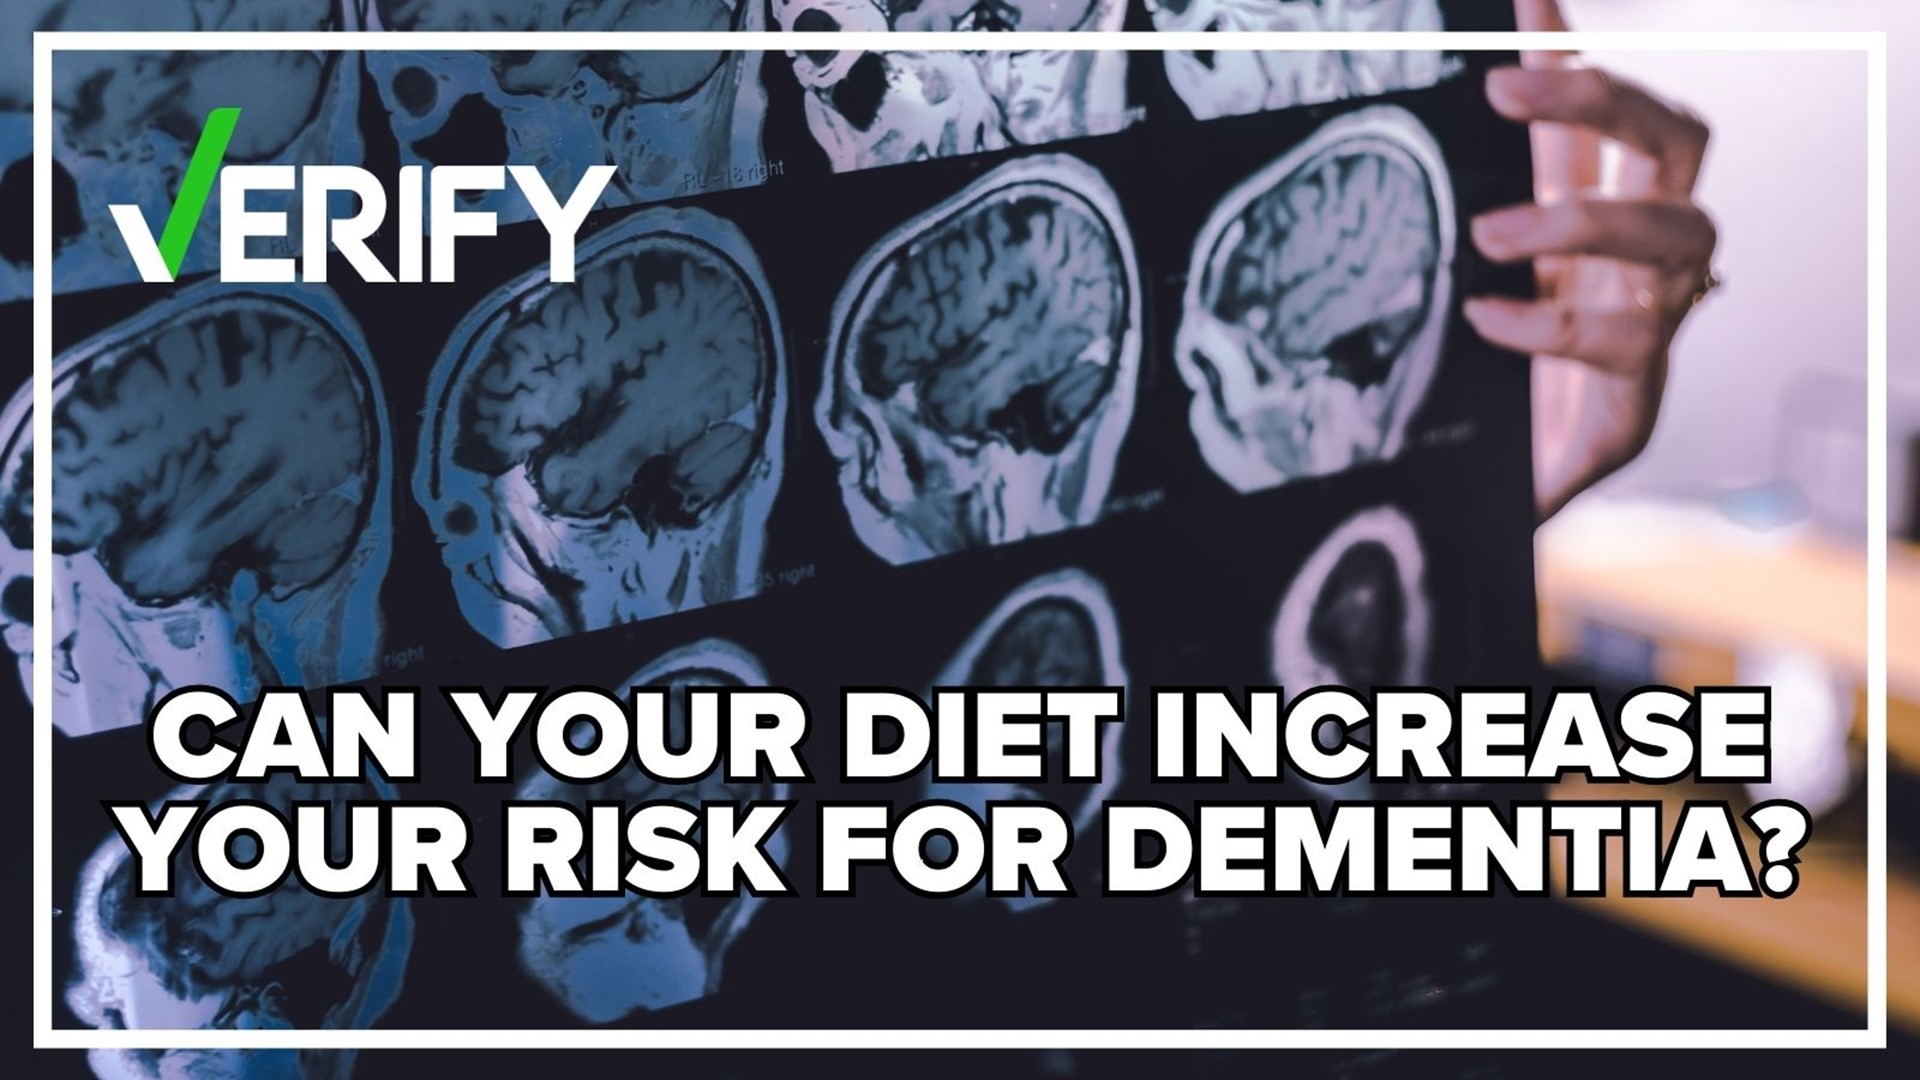 More than 6 million Americans age 65 and older suffer from Alzheimer's. Could your diet play a role in developing dementia?